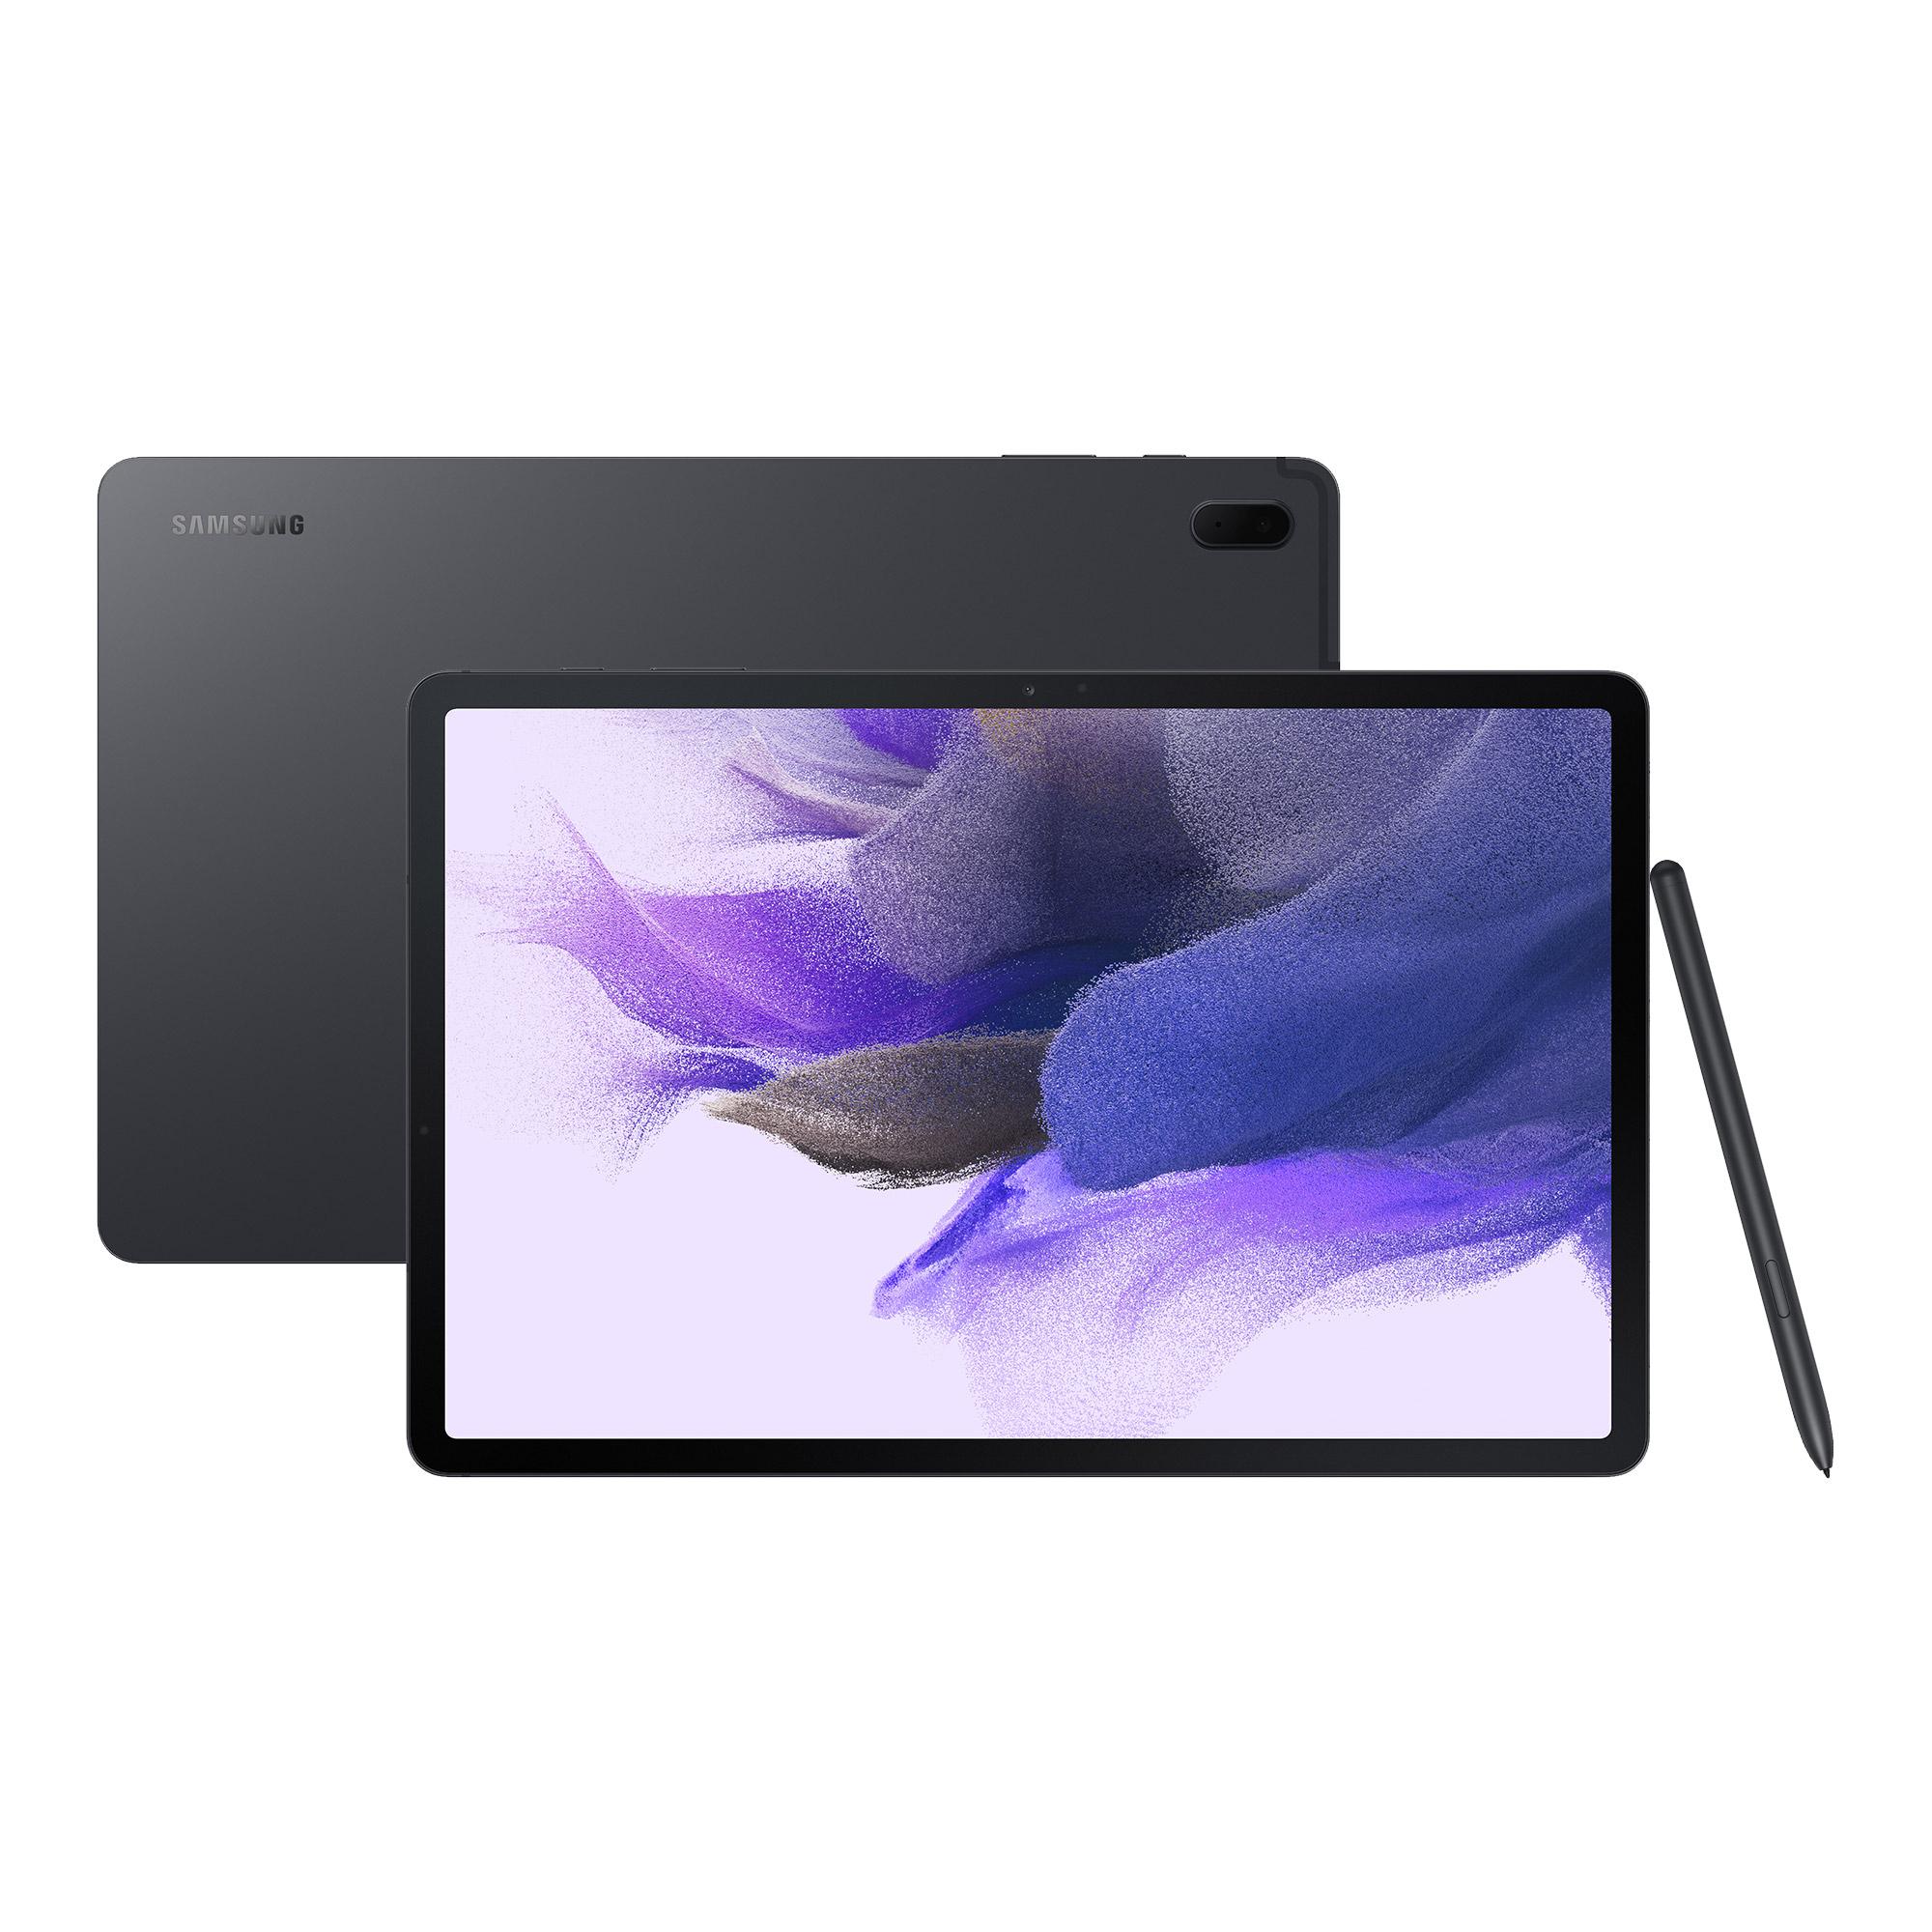 £629, SAMSUNG Galaxy Tab S7 FE 12.4inch 5G Tablet - 128 GB, Mystic Black, Android 11, Quad HD screen, 128 GB storage: Perfect for saving pretty much everything, Add more storage with a microSD card, Battery life: Up to 13 hours, Dolby Atmos, Miracast, 